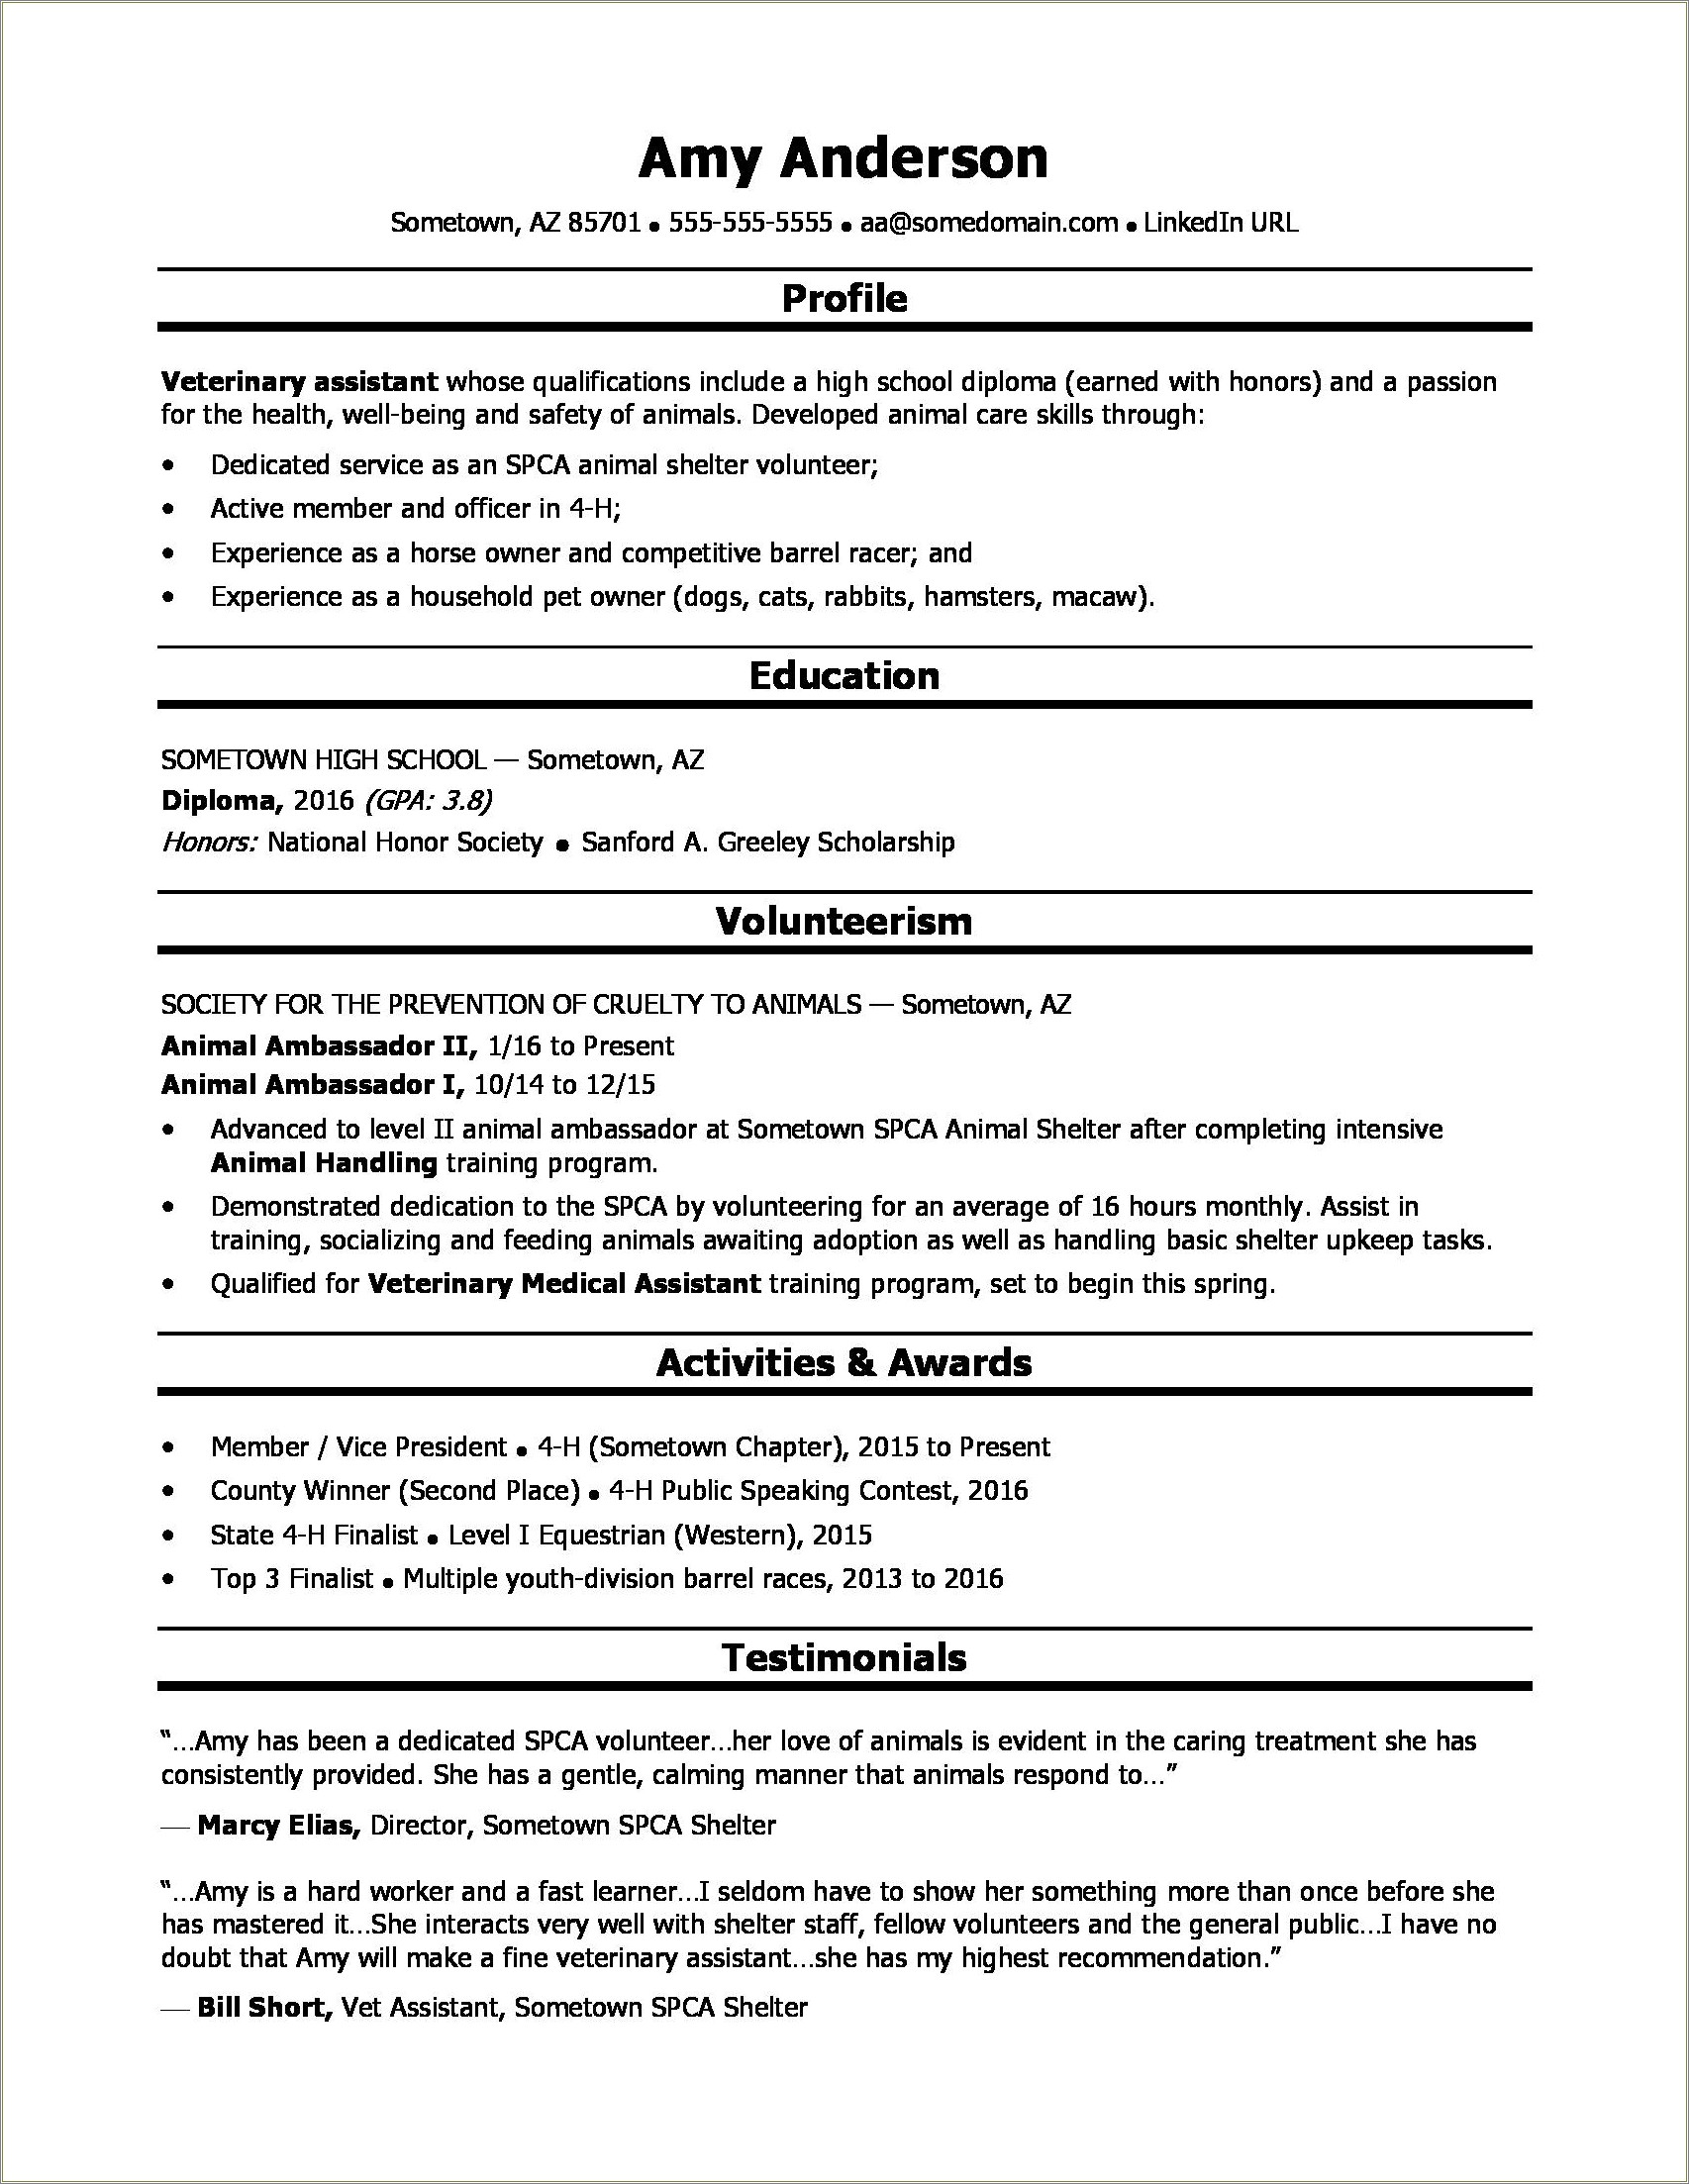 Samples Of High School Resumes For College